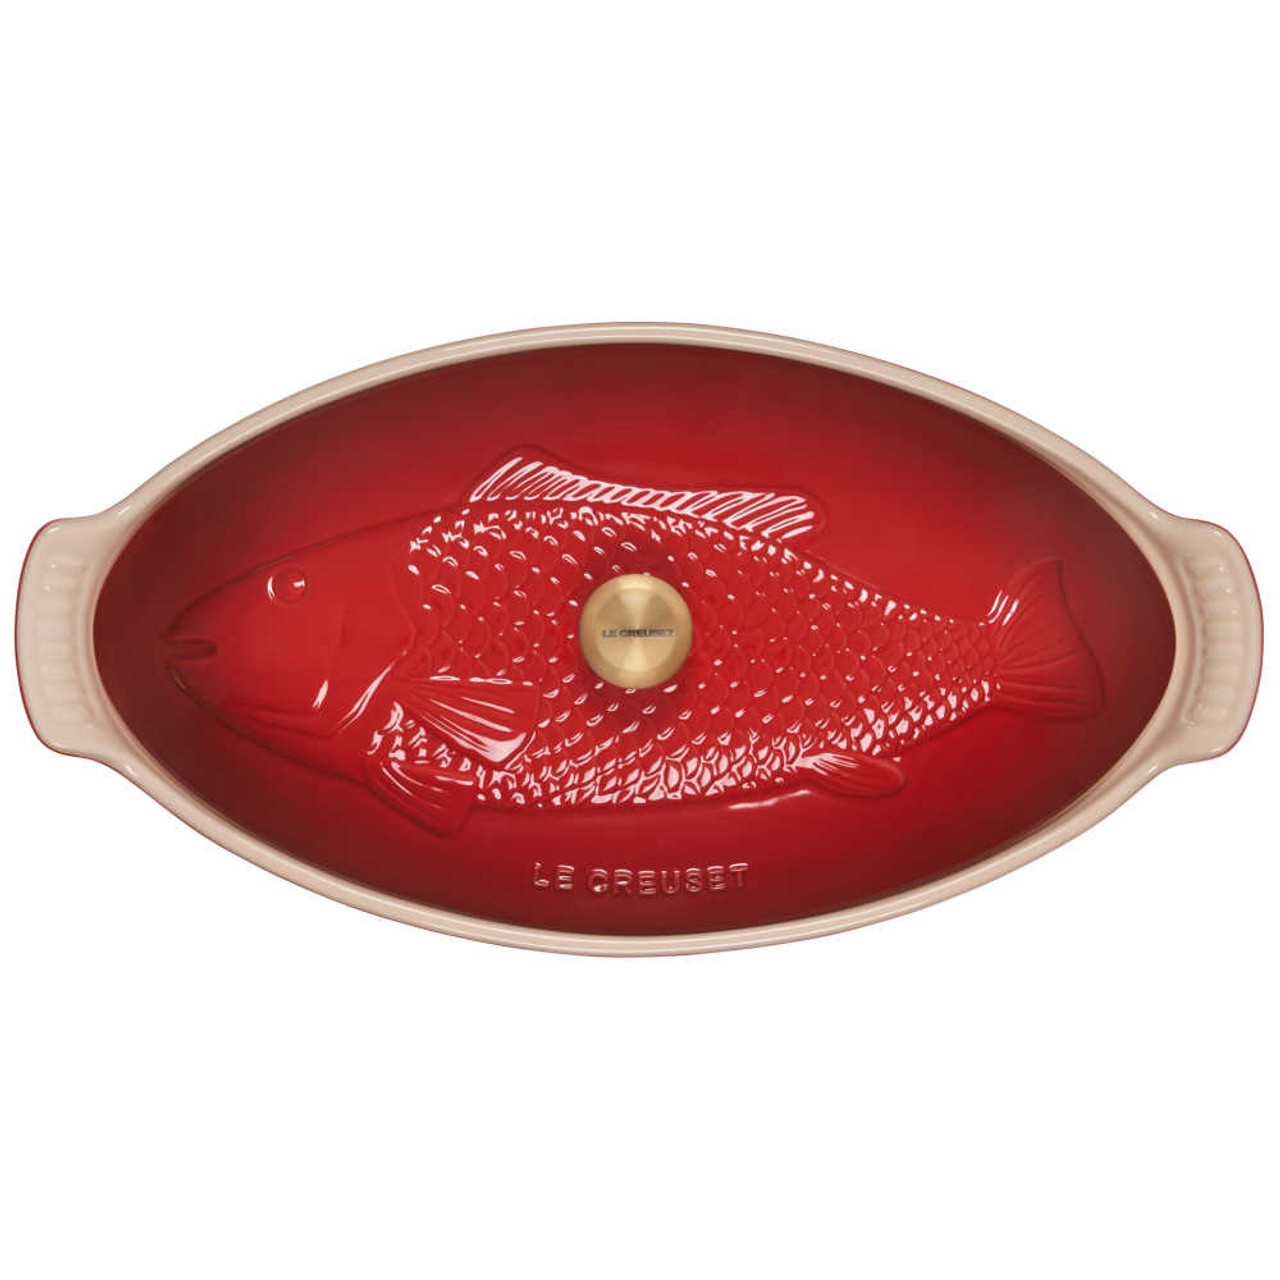 https://cdn11.bigcommerce.com/s-hccytny0od/images/stencil/1280x1280/products/5521/24071/Le_Creuset_Fish_Baker_in_Cerise_2__84876.1688764305.jpg?c=2?imbypass=on